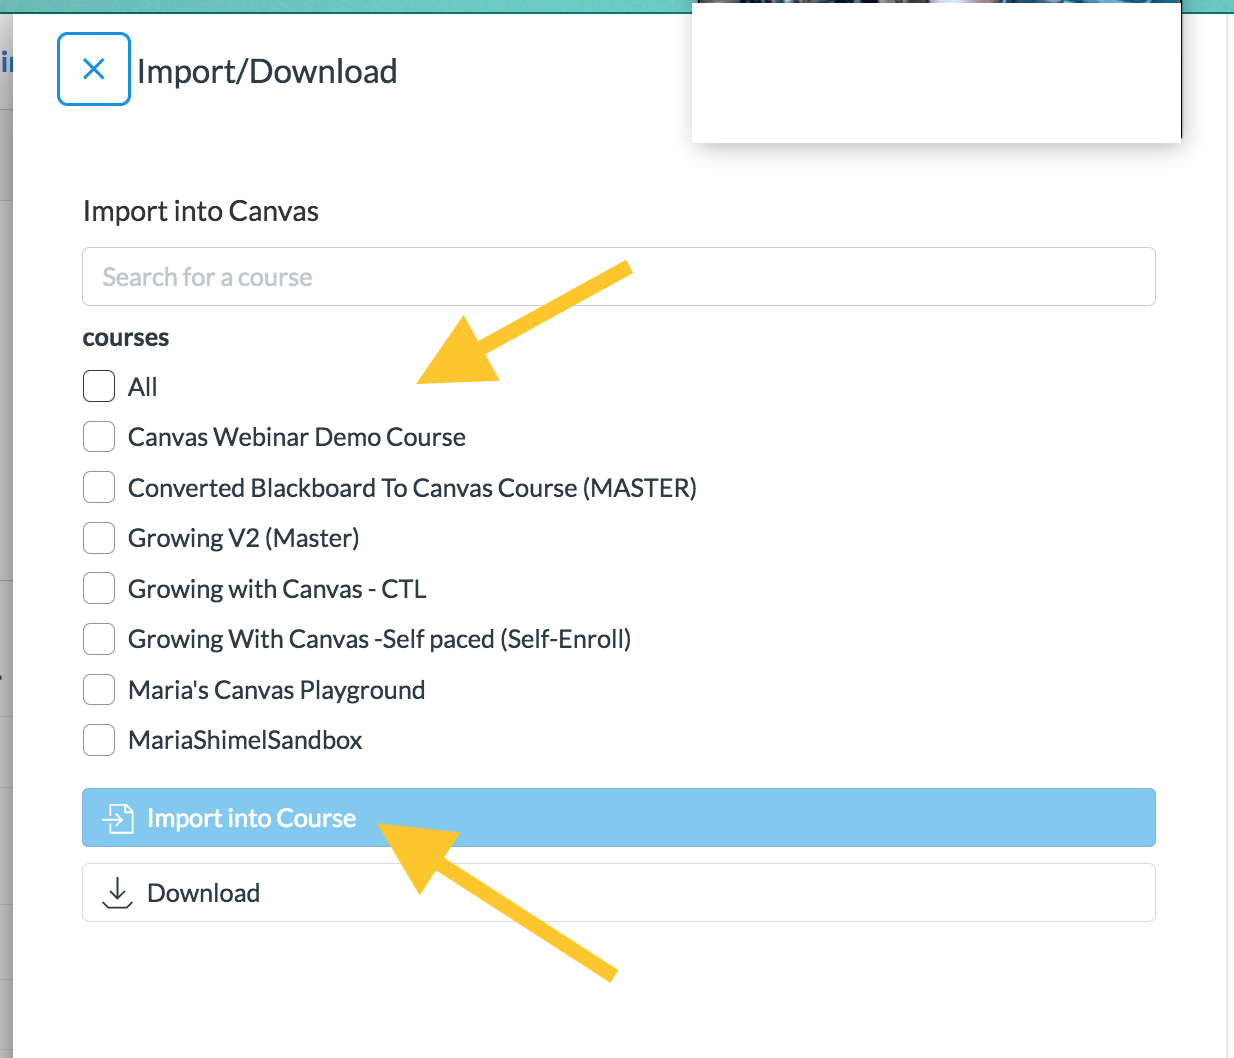 choose the checkbox next to the course you would like to  import and select Import into Course.